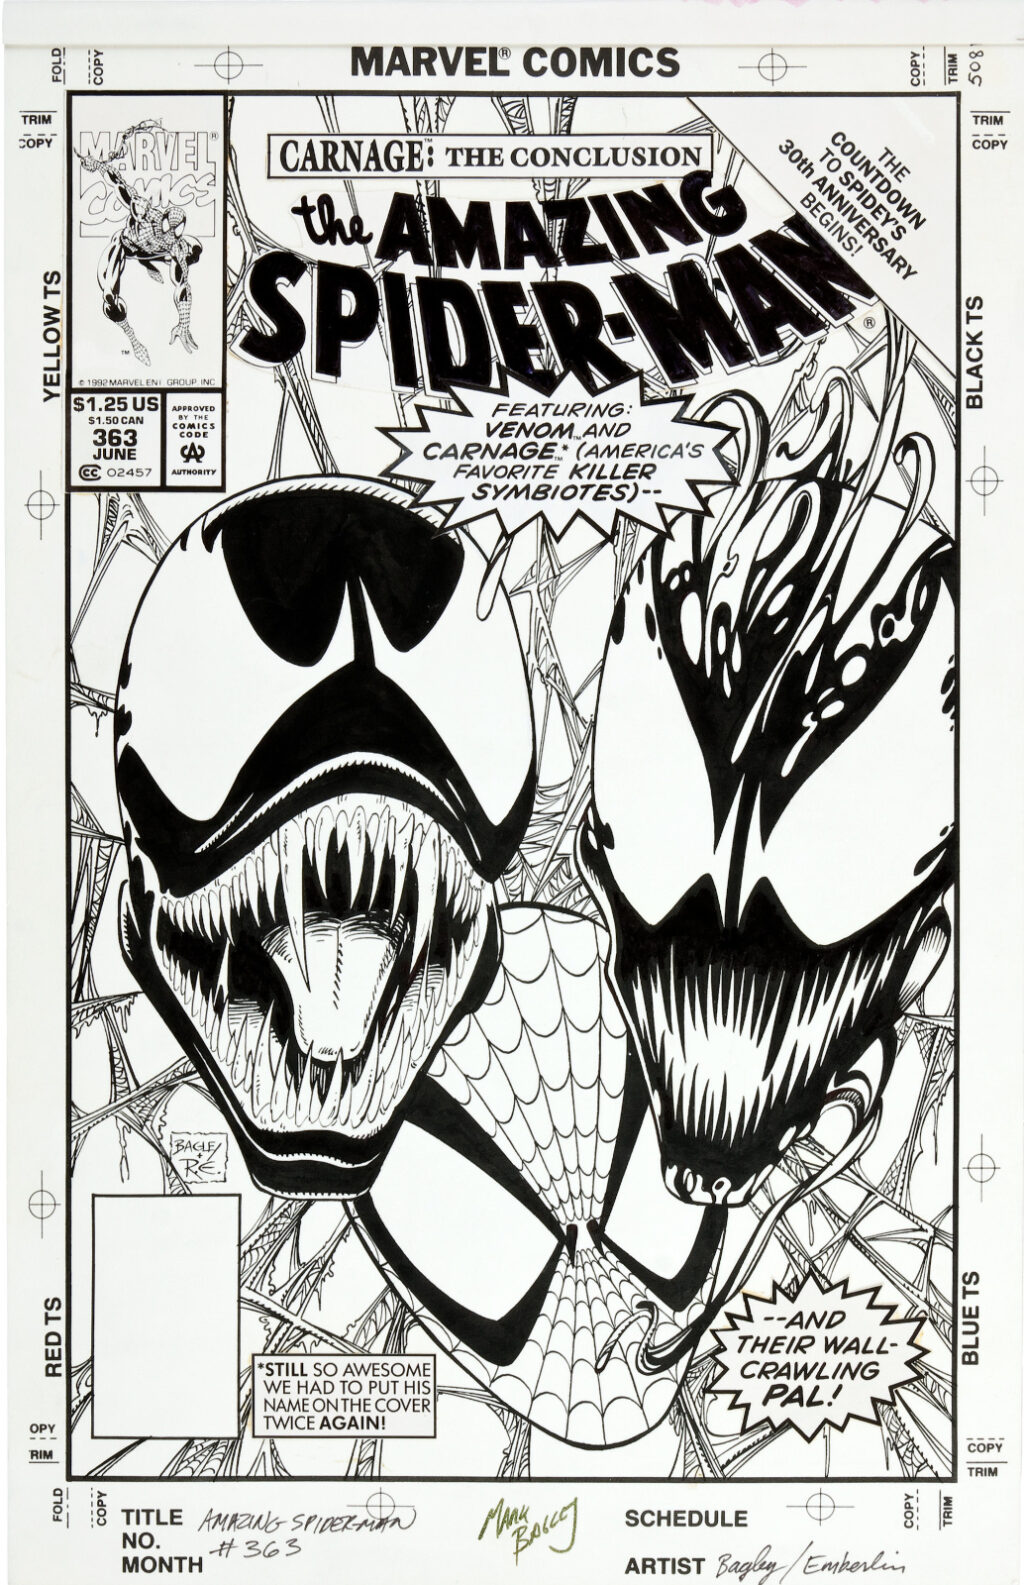 Amazing Spider Man issue 363 cover by Mark Bagley and Randy Emberlin